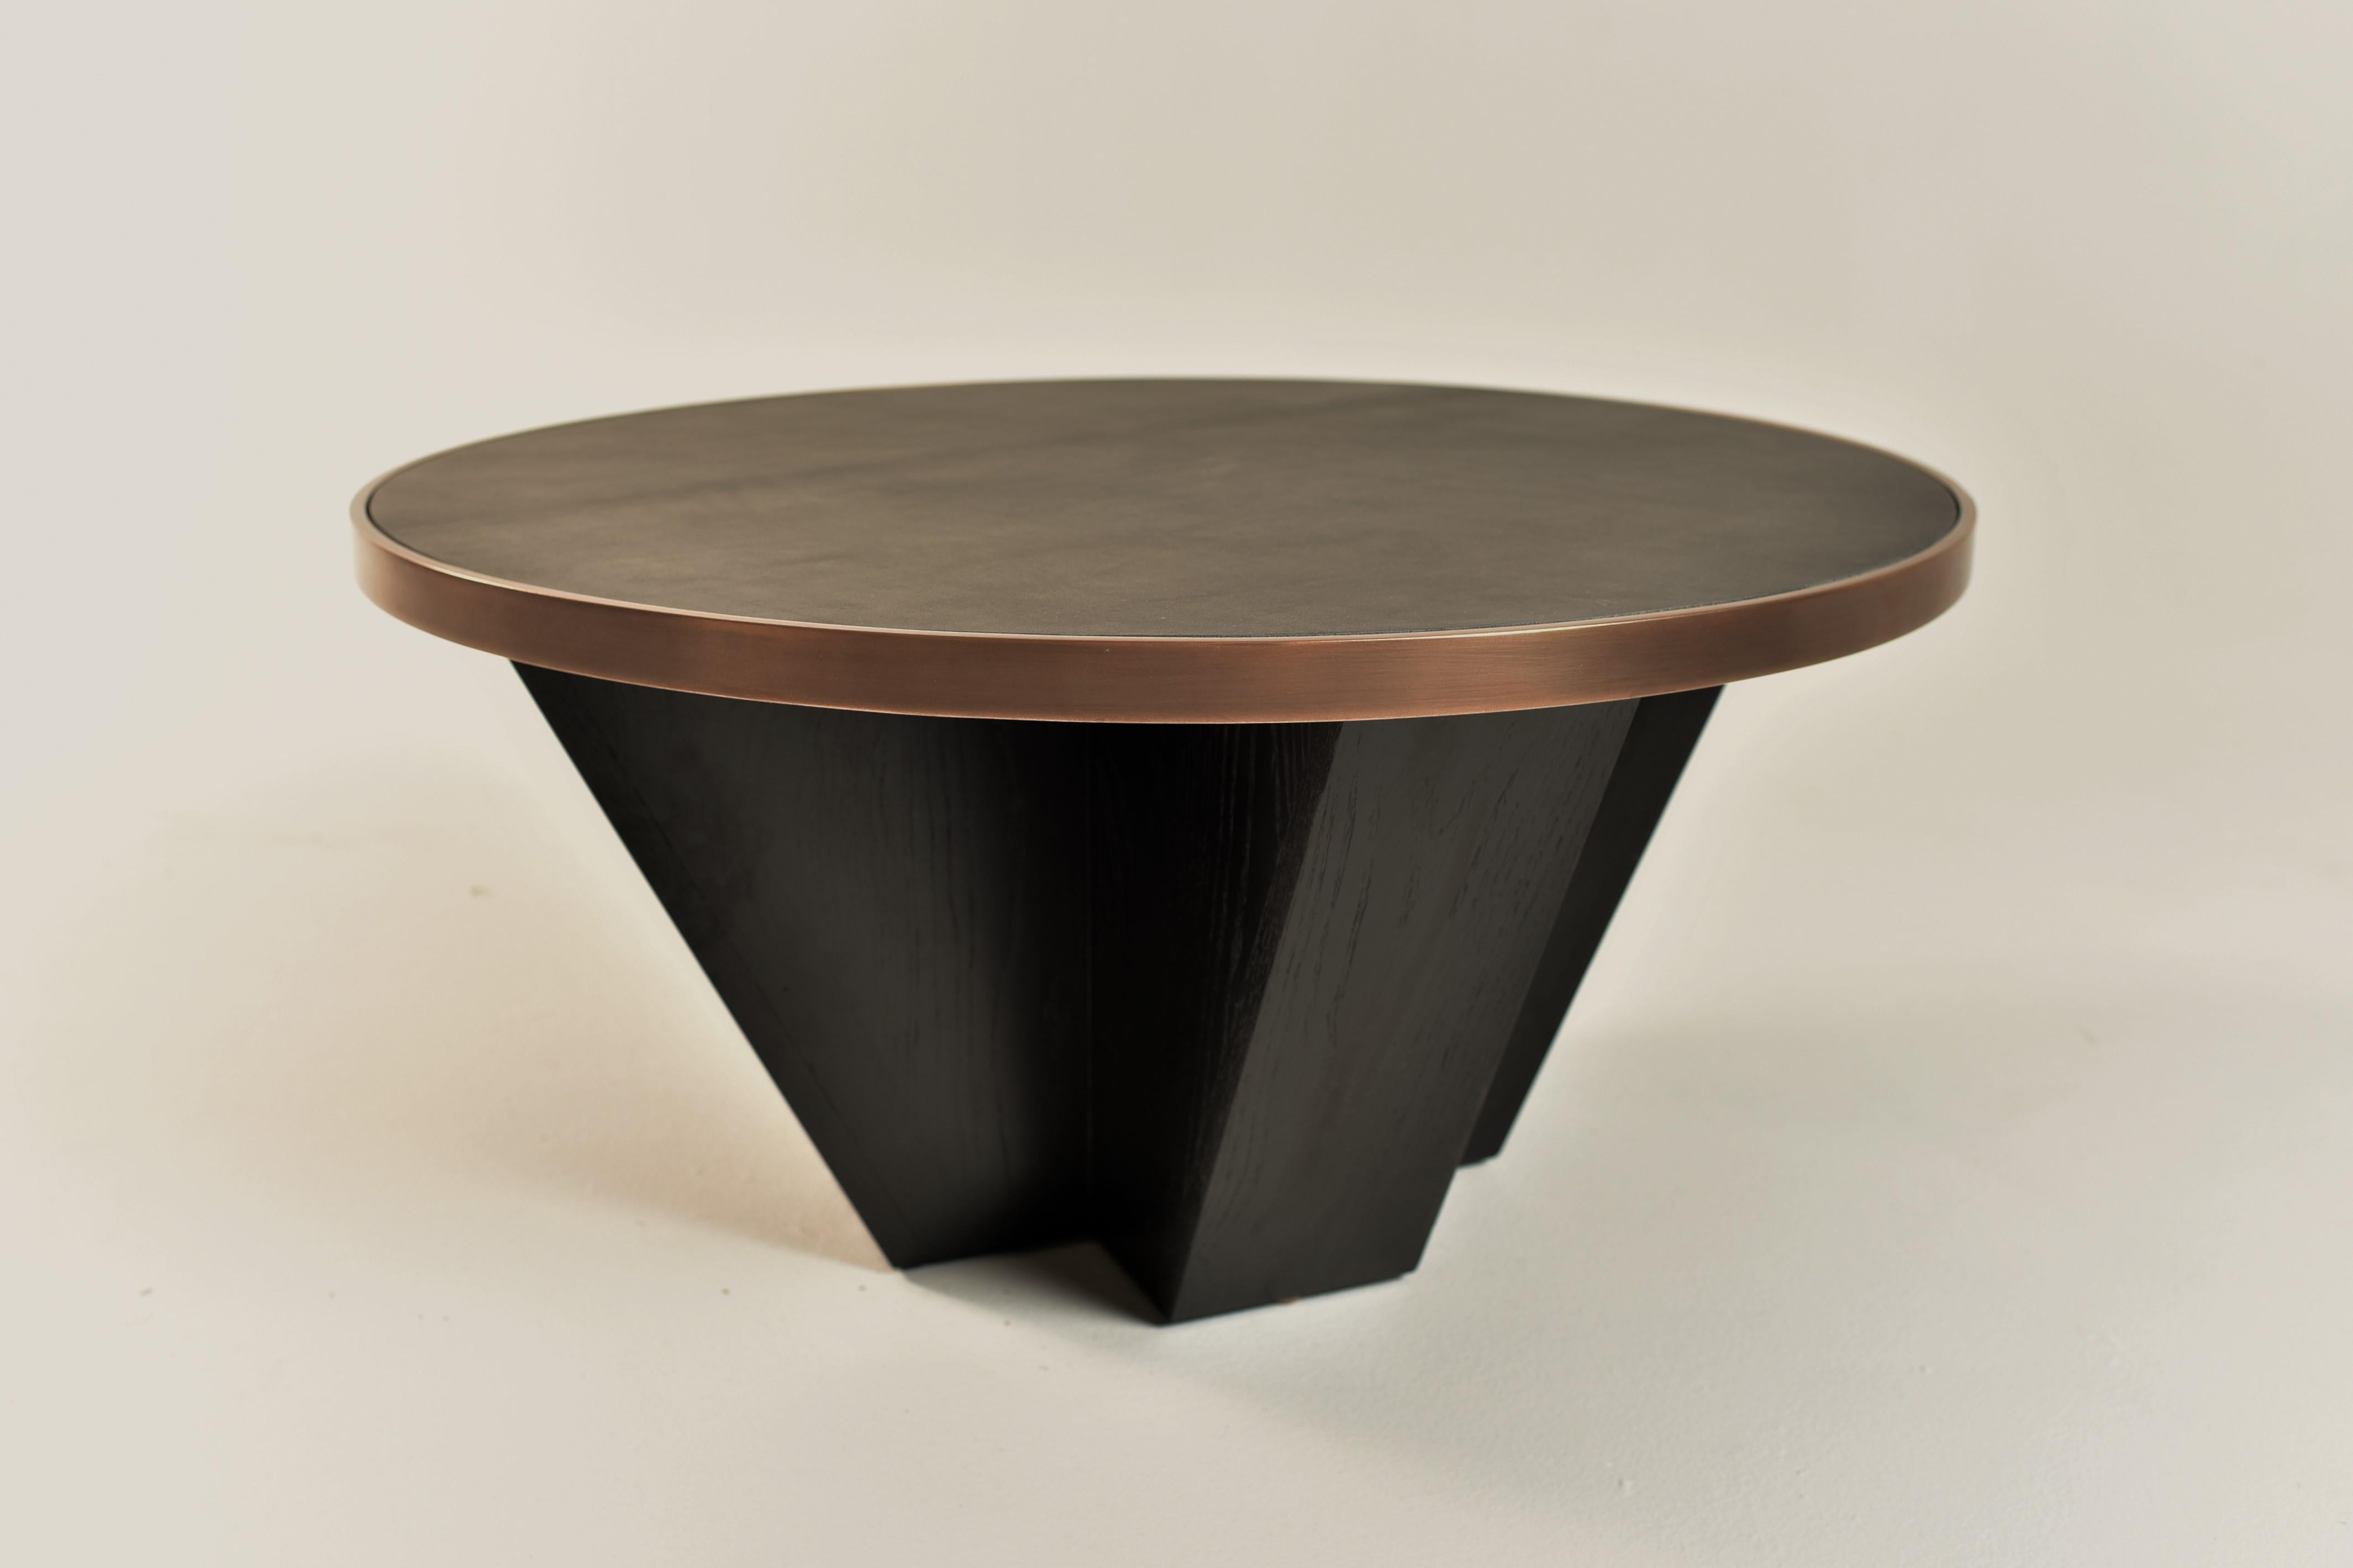 Ash and brass Venus coffee table by Jason Mizrahi.
Dimensions: diameter 81.28 x height 38 cm.
Materials: Stained ash, leather top, brass coated frame.

Jason Mizrahi is a designer of contemporary furniture. He was born and raised in Los Angeles,